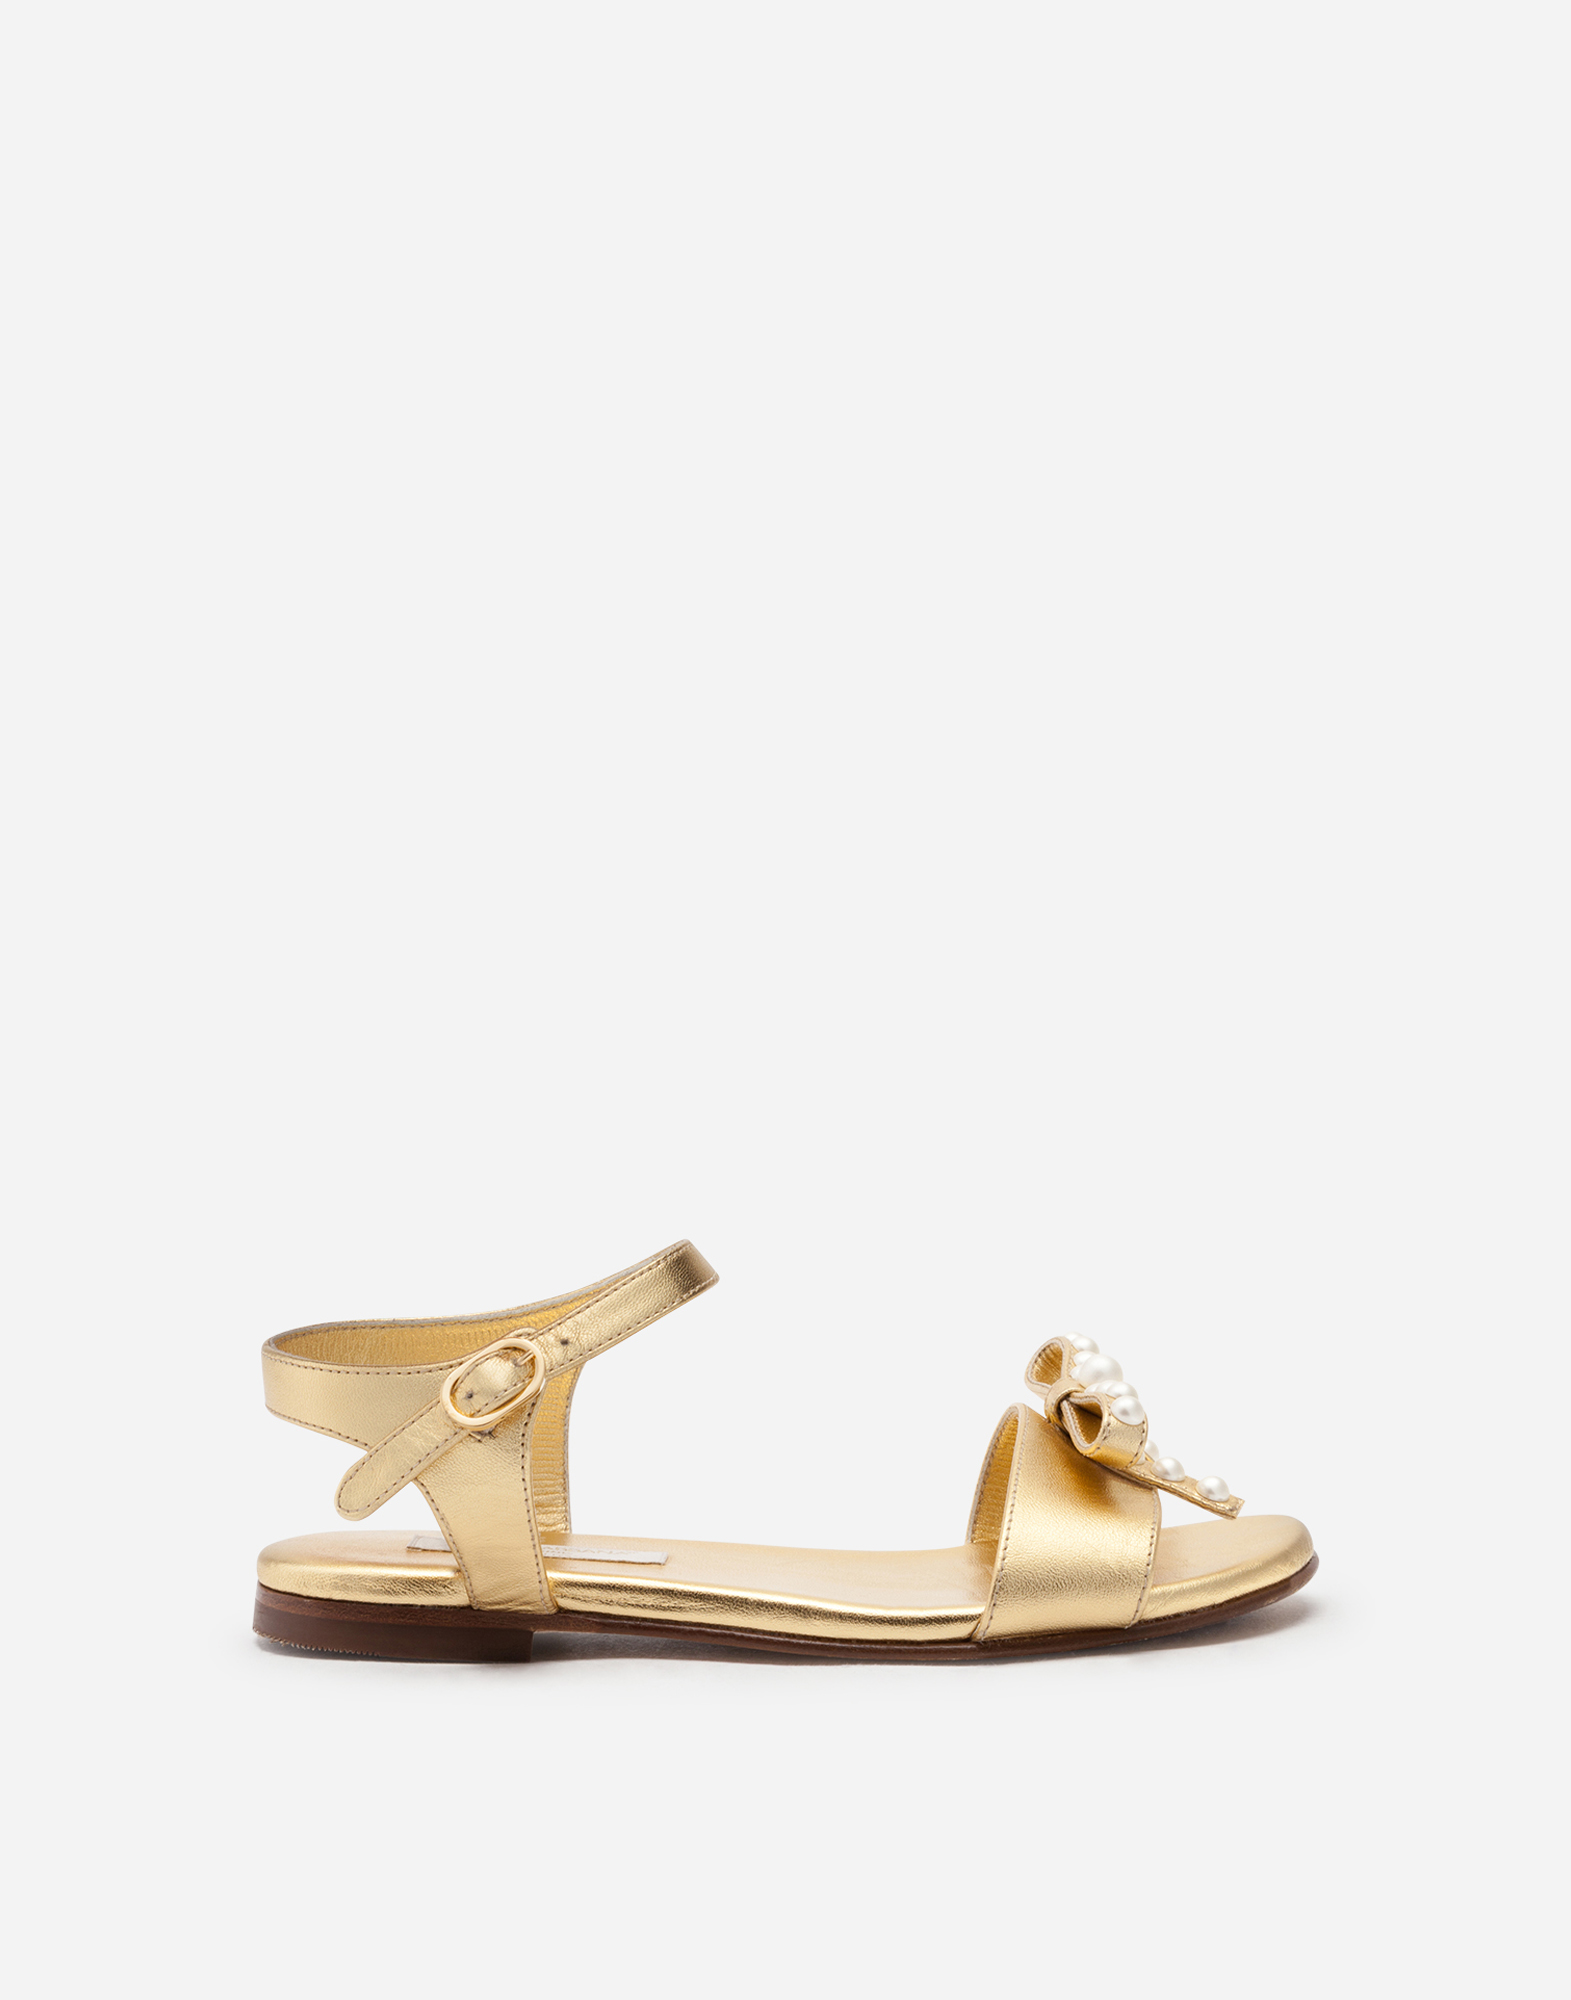 DOLCE & GABBANA Ankle strap sandals in laminated leather with bow